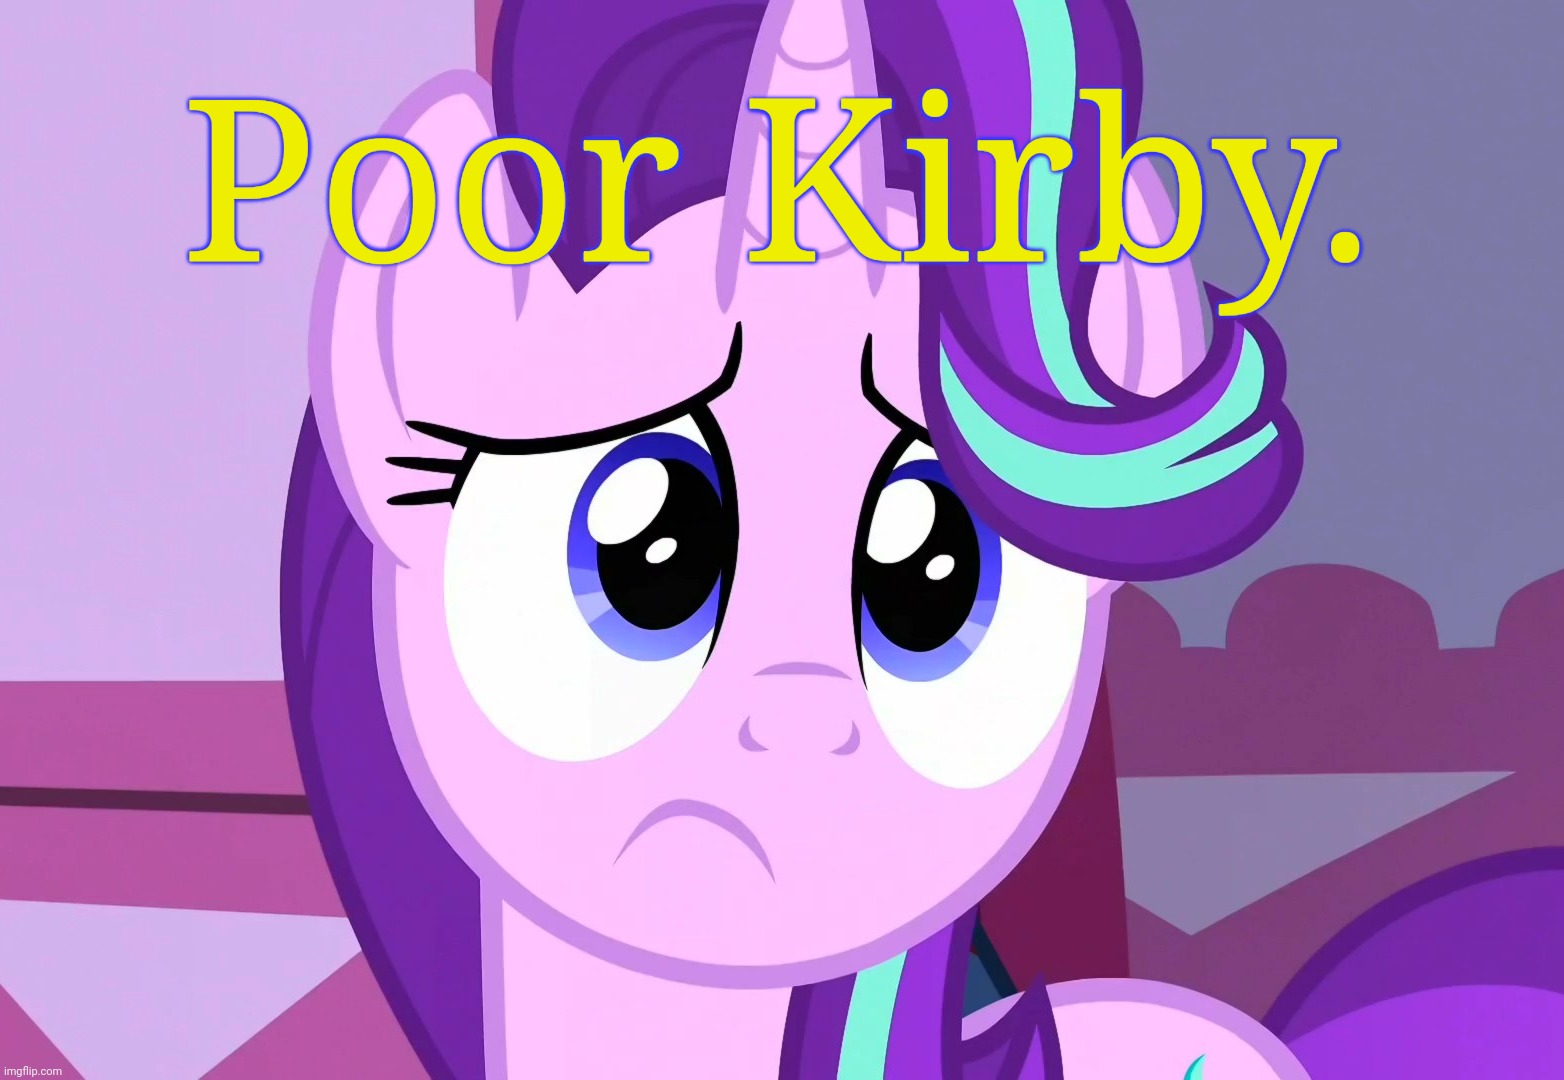 Sadlight Glimmer (MLP) | Poor Kirby. | image tagged in sadlight glimmer mlp | made w/ Imgflip meme maker